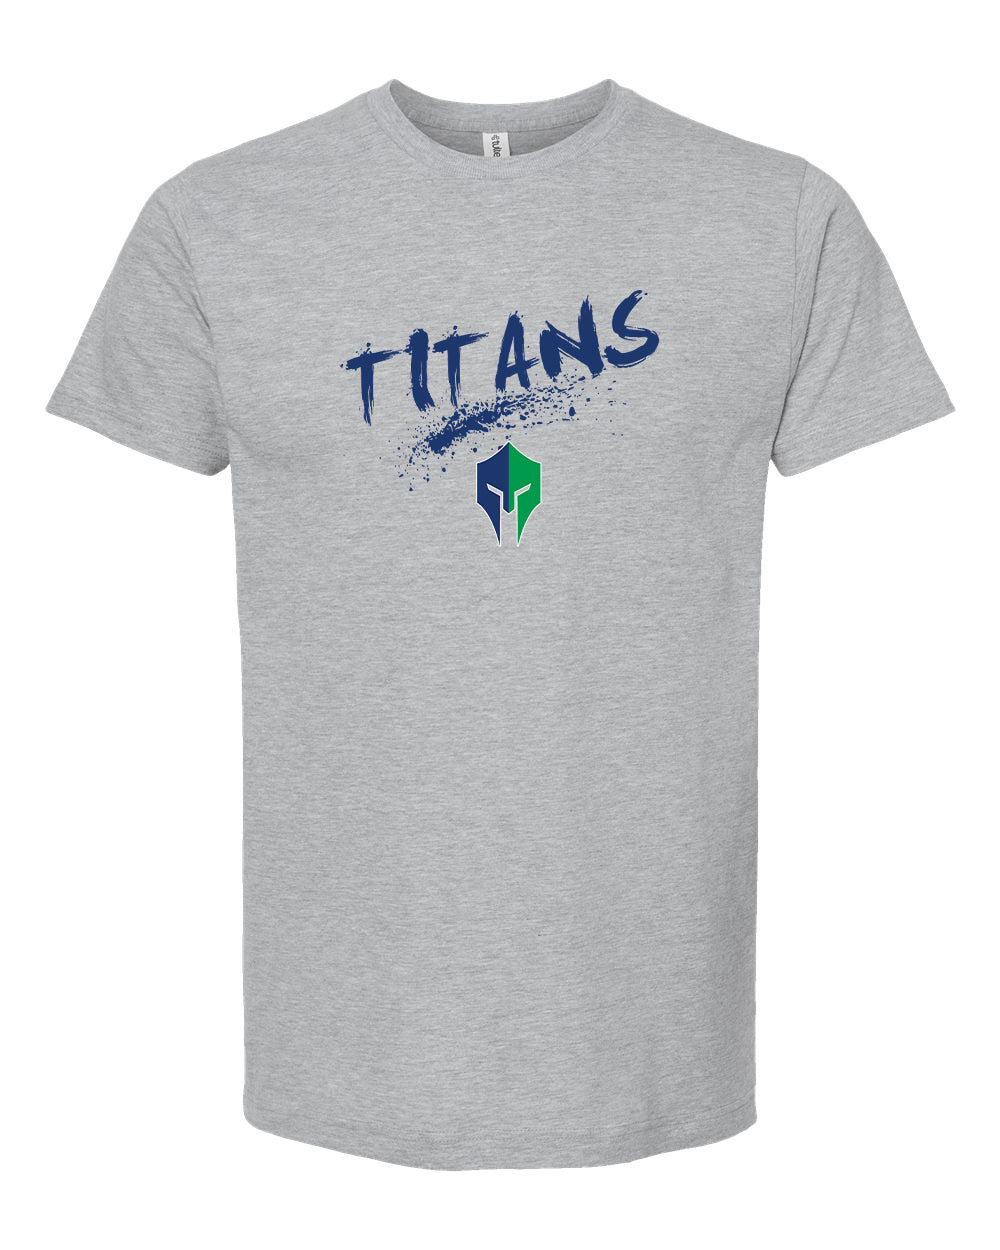 Titans Adult Tee "300" - 202 (color options available)